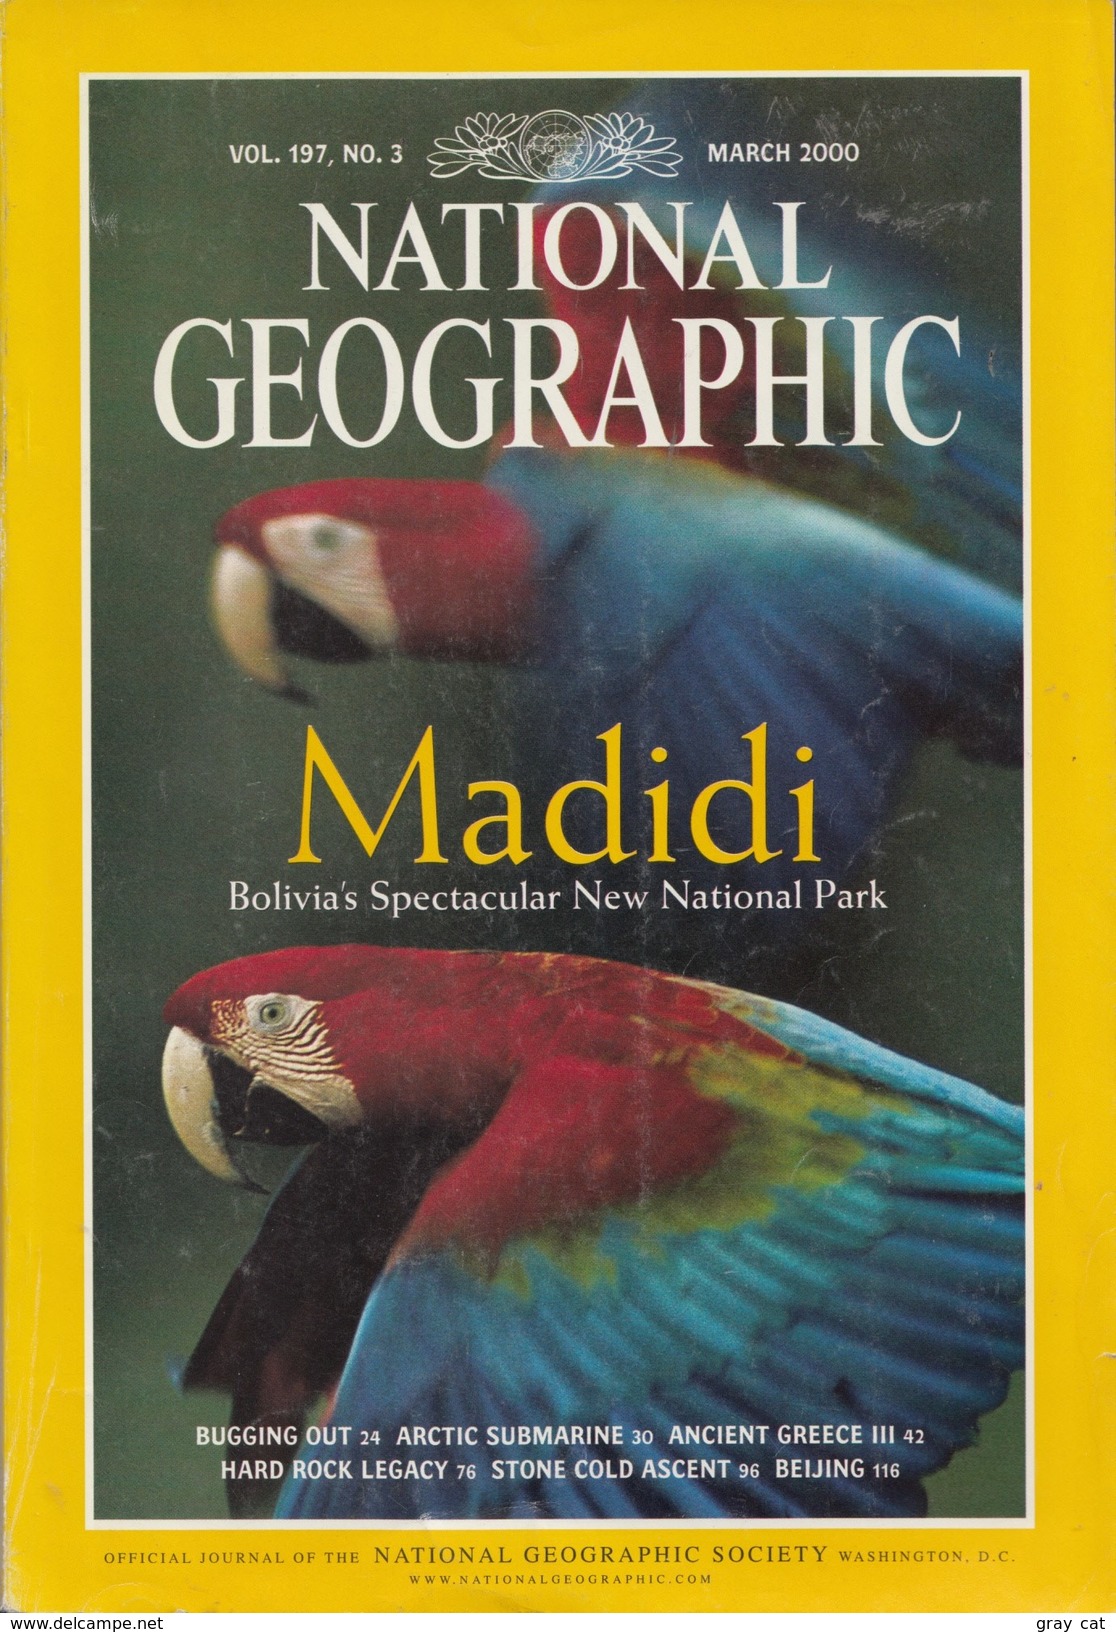 National Geographic Vol. 197, No. 3 March 2000 - Travel/ Exploration